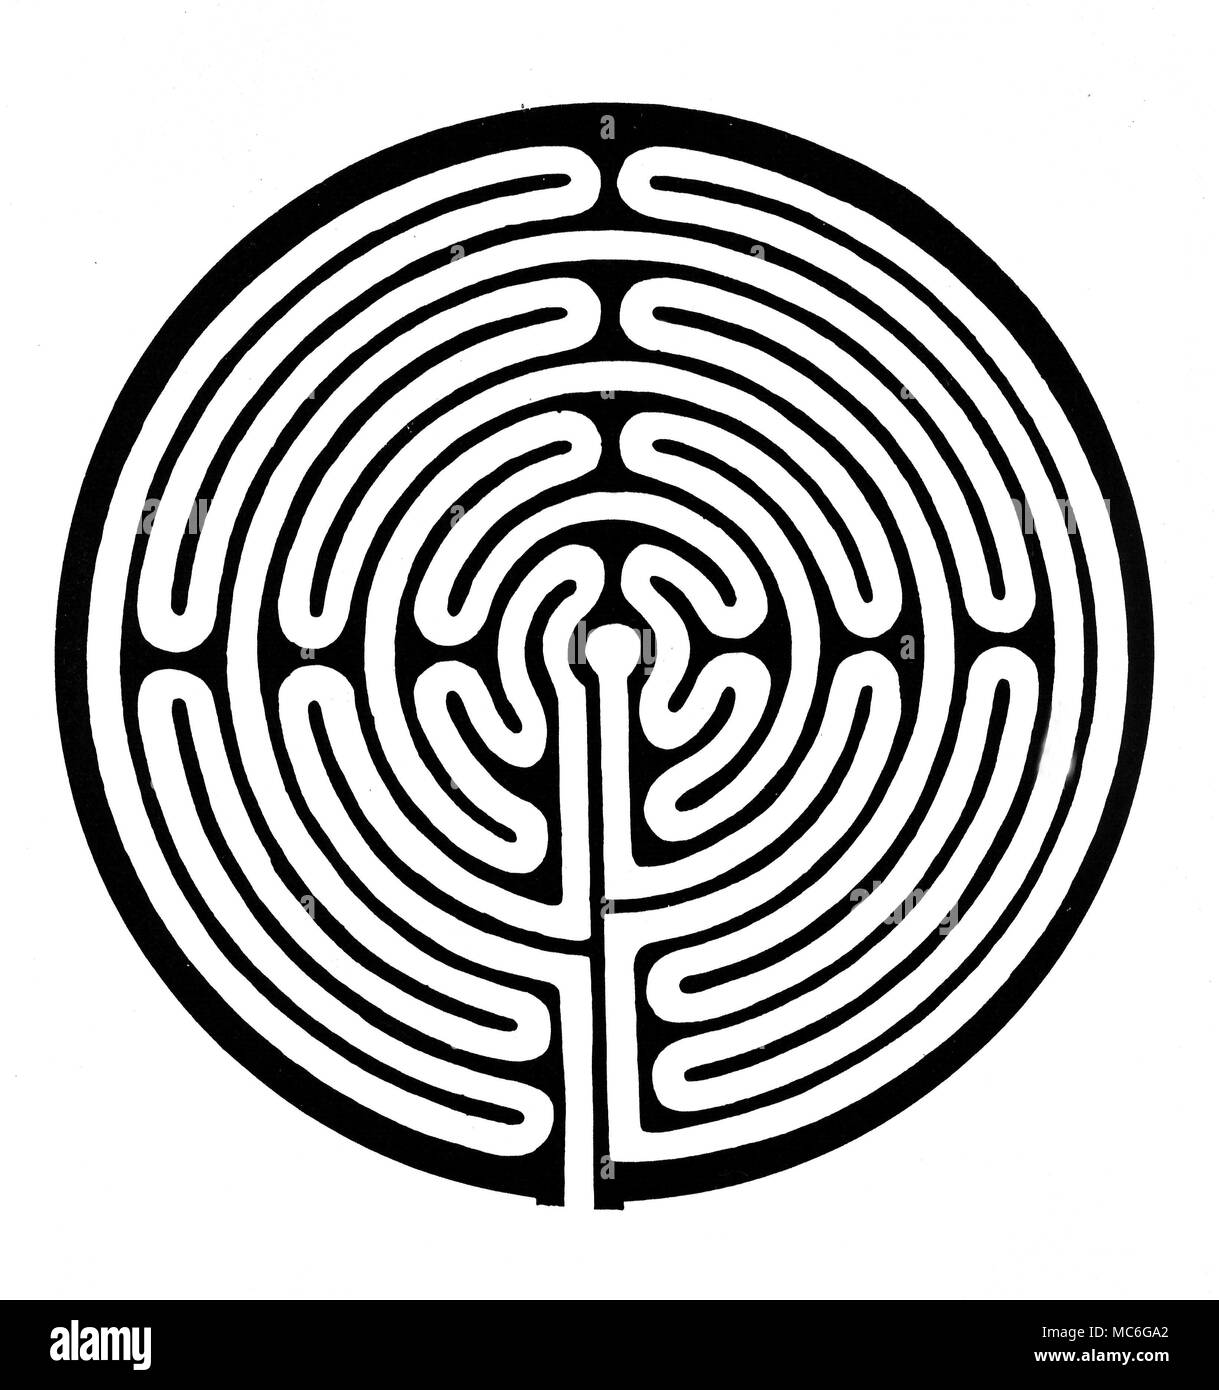 MAZES - THE ALKBOROUGH MAZE - JULIAN'S BOWER Ground plan of the mediaeval maze known as Julian's Bower, at Alkborough. The original turf maze is 12 metres in diameter [colour pictures of this maze are available in the Charles Walker archives]. The ground plan has been adopted for details in the masonry and stained glass of the local parish church, and even on grave-stones [colour images of all these are in the Charles Walker archives]. This is not a pure maze, for, once having embarked upon its pathway, there is no chance of becoming lost: the path leads inexorably to the inner circle. Stock Photo